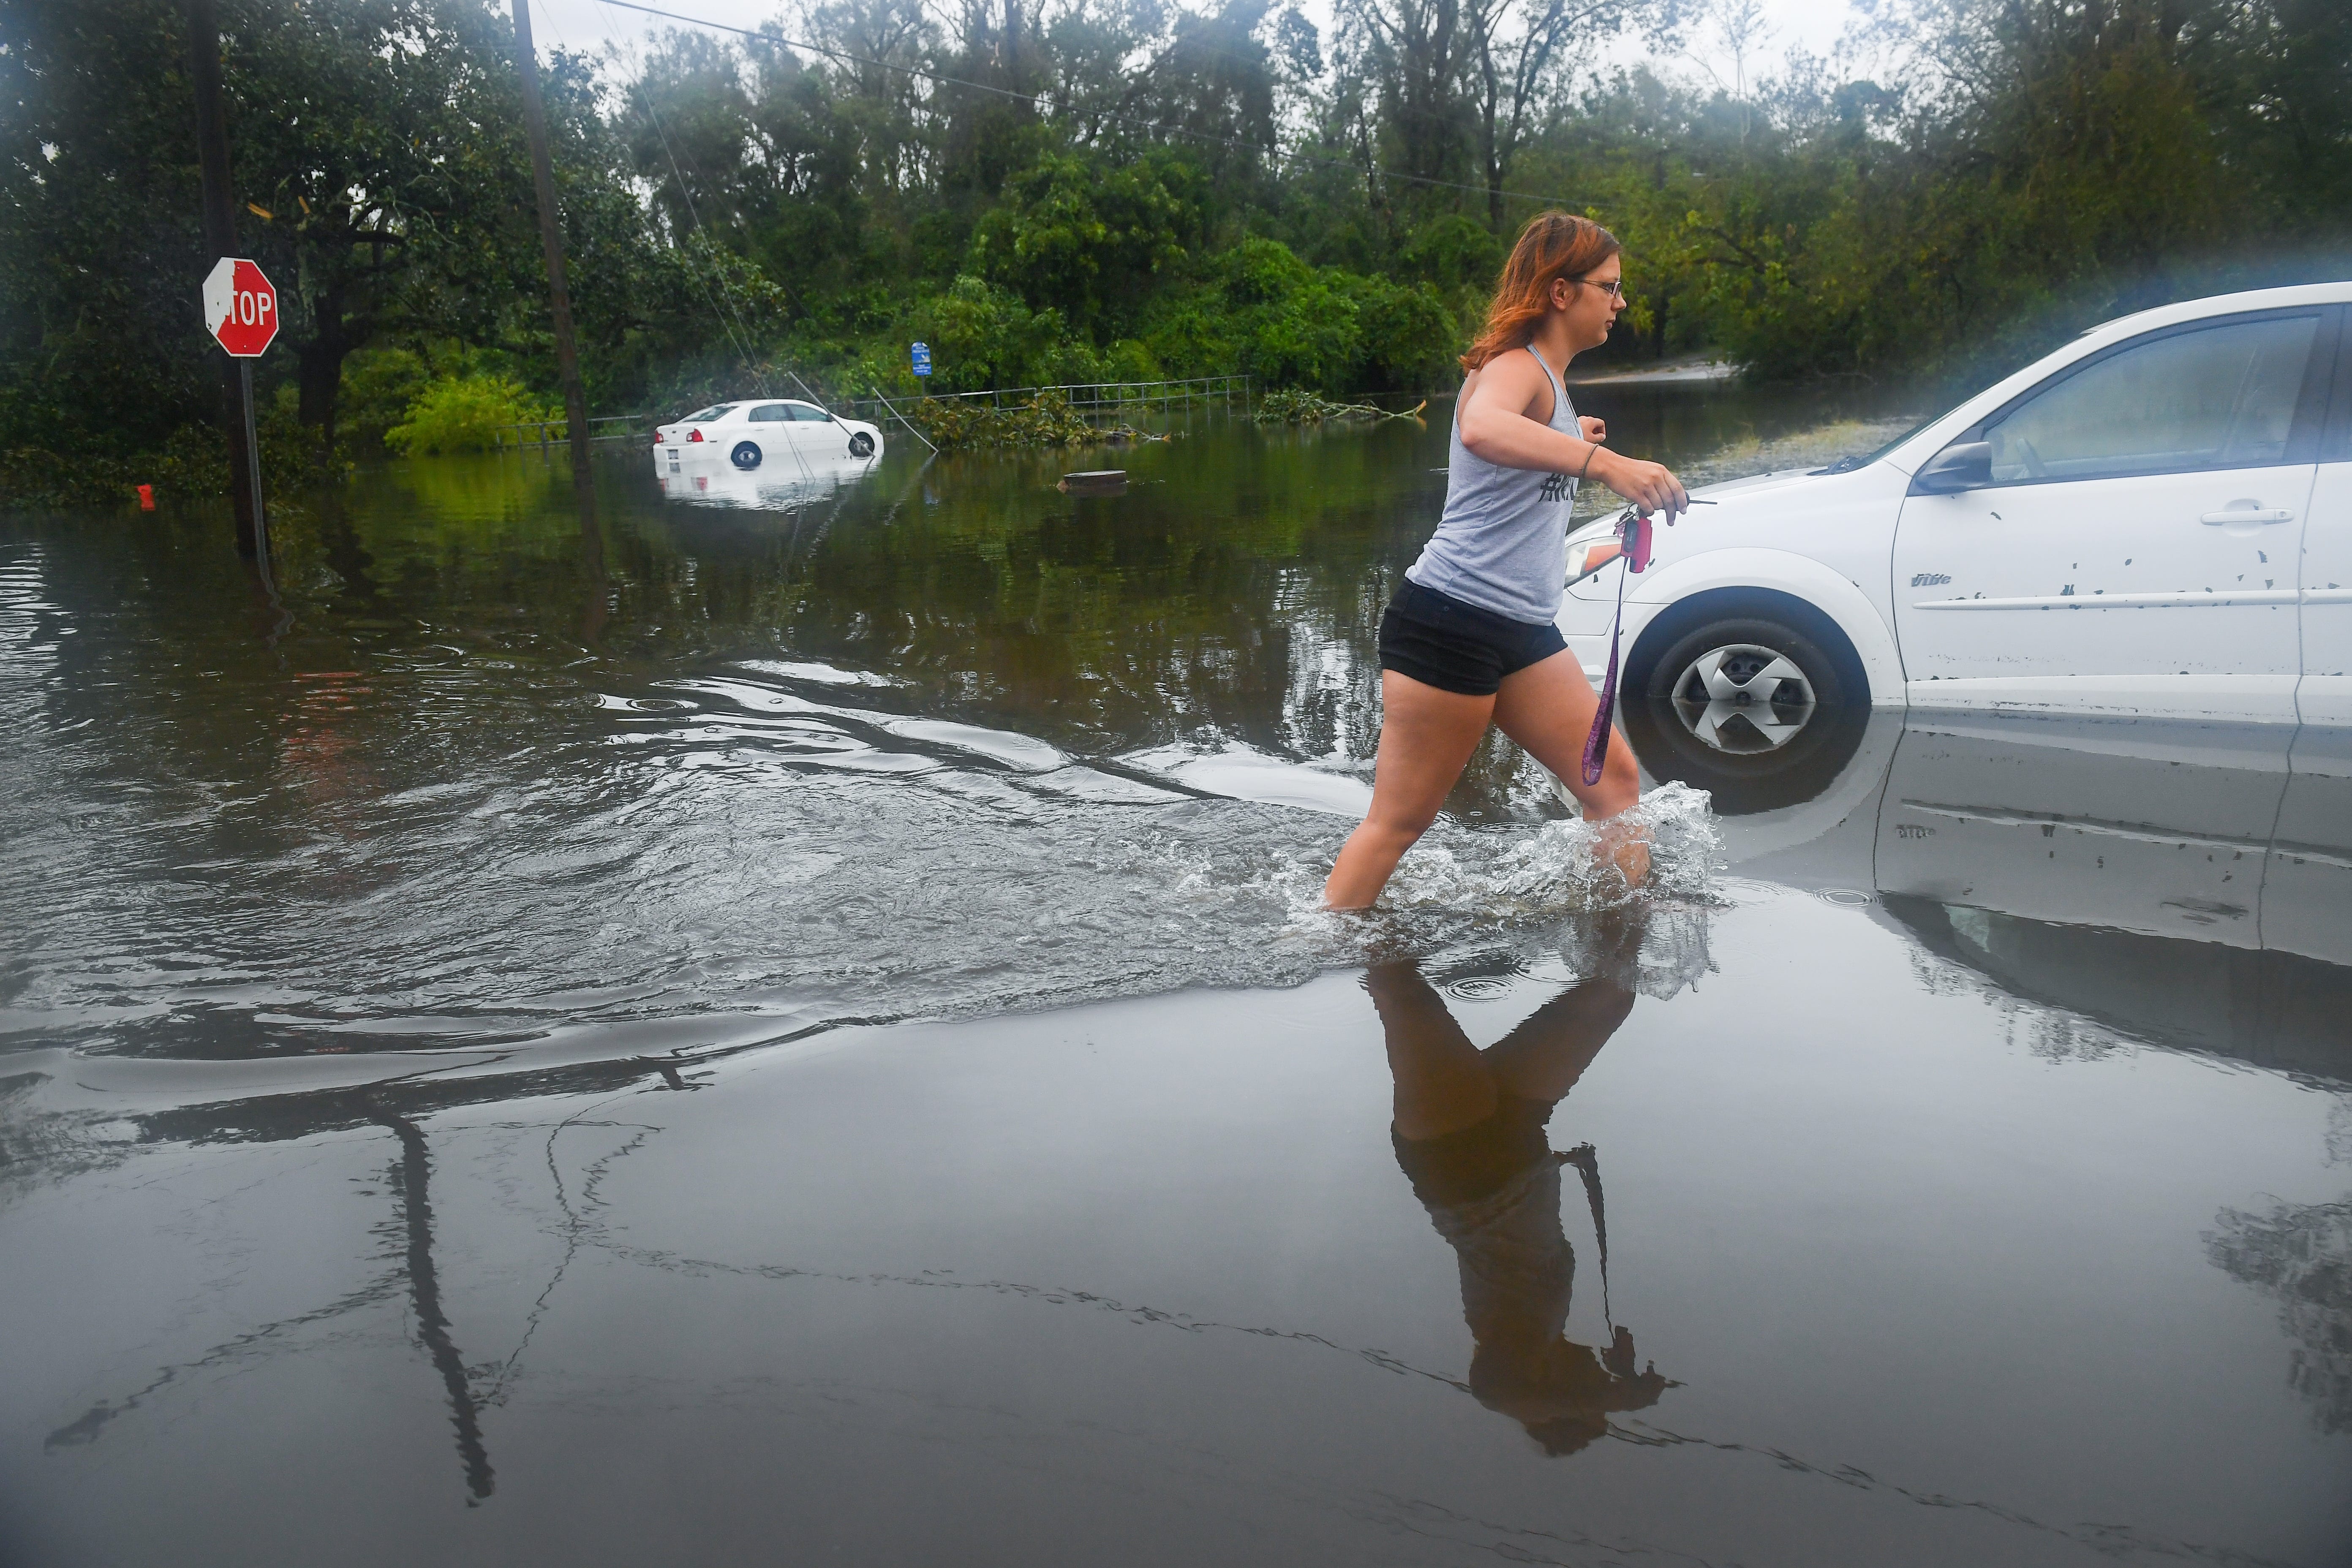 Mackenna Munson, 21, attempts to get to her flooded car on Rankin Street in Wilmington, N.C, on Sunday, Sept. 16, 2018. Her family stayed through Hurricane Florence and weathered the storm minus electric service but woke up on Sunday morning to find 